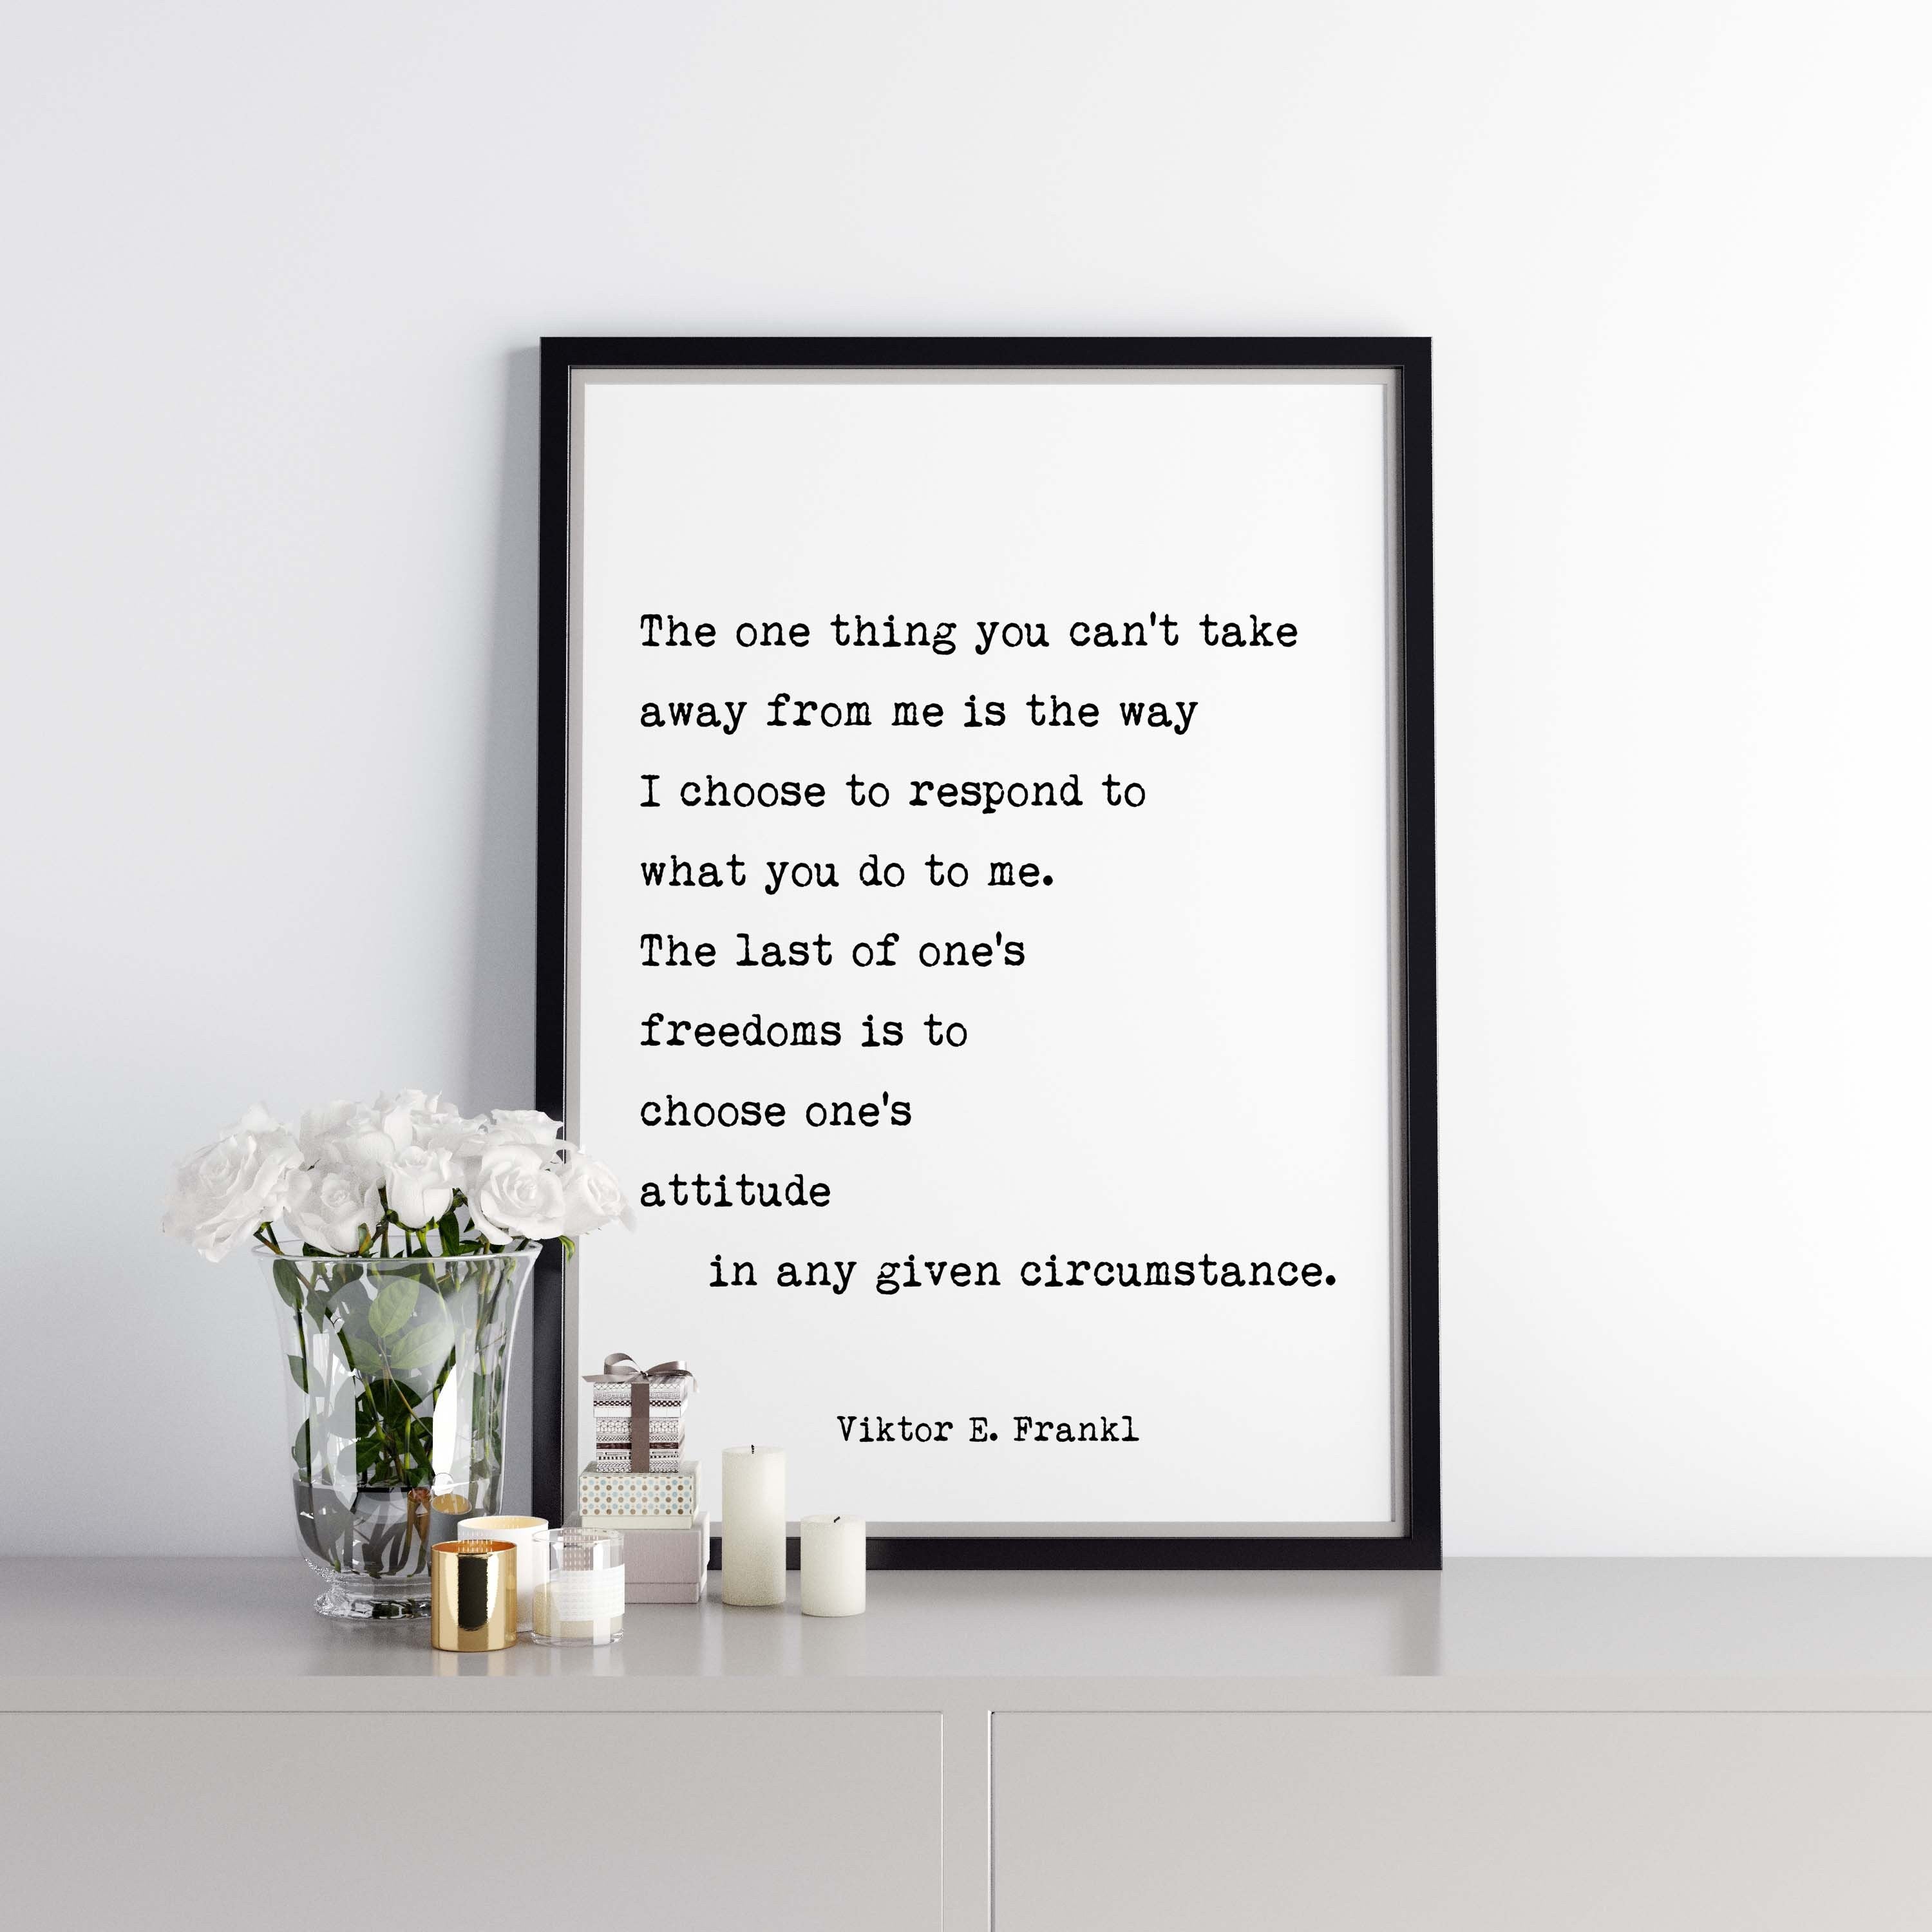 Viktor Frankl Inspiring Art Print, The One Thing You Can’t Take Away From Me from Man's Search For Meaning